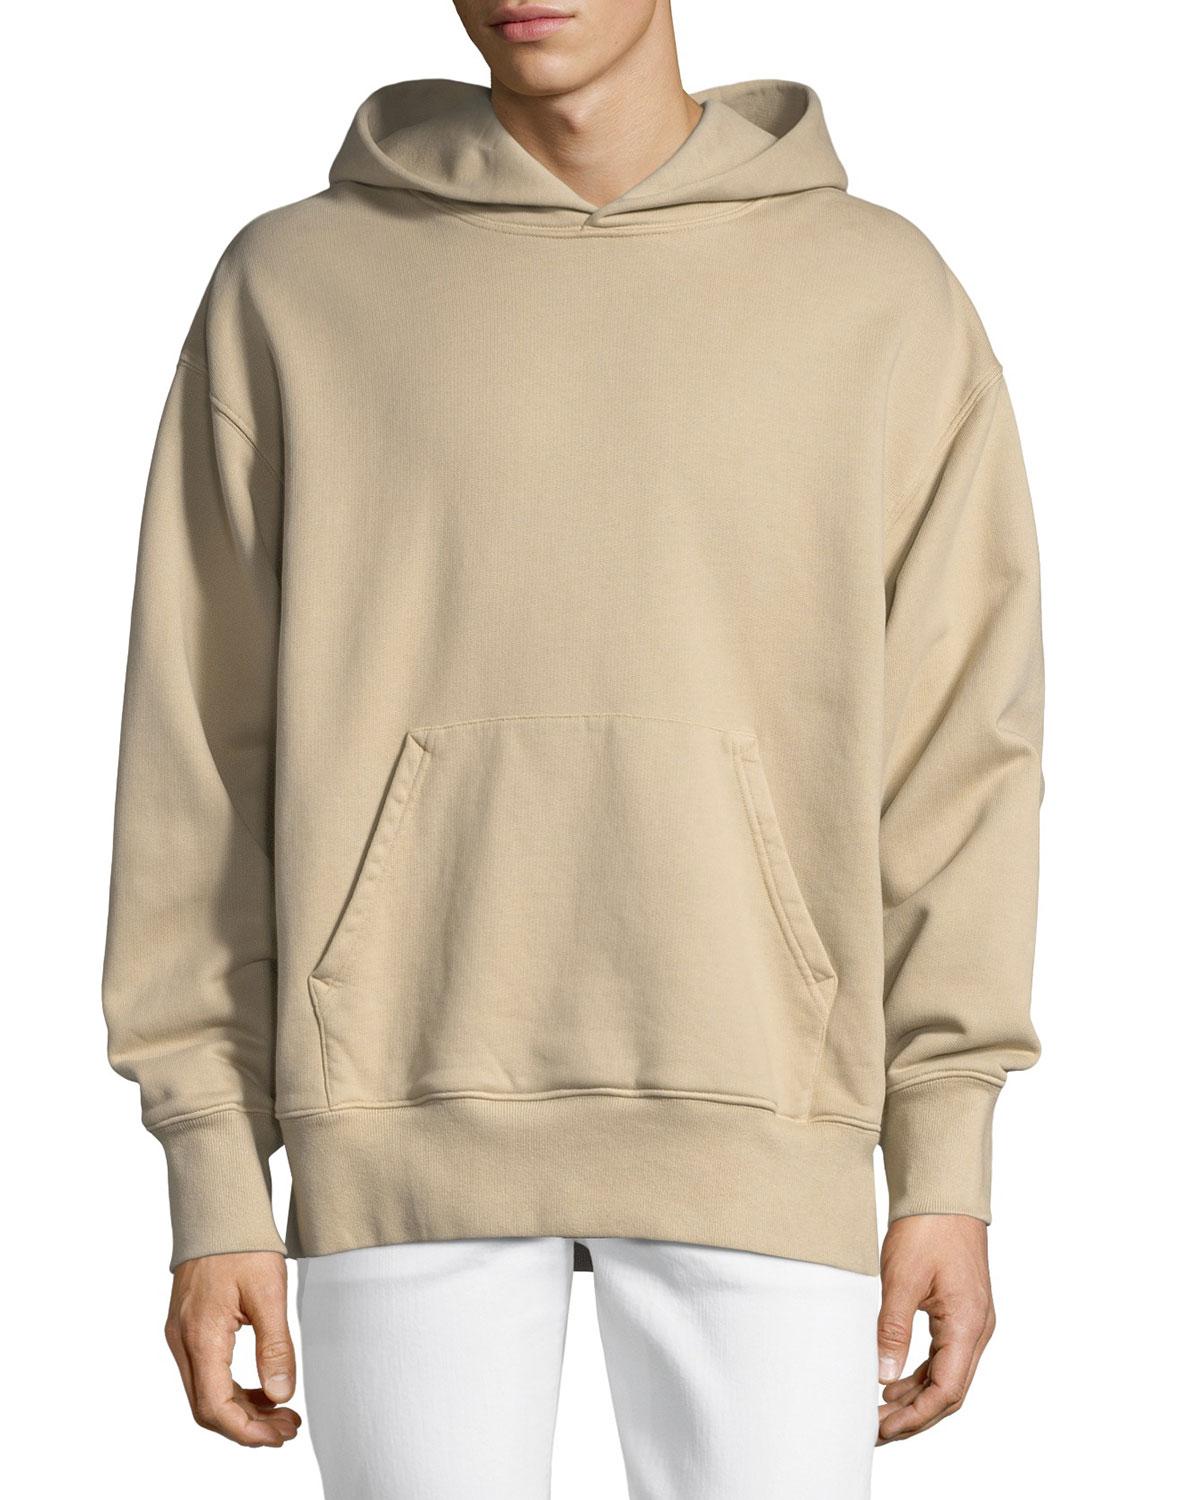 yeezy-boxy-fit-pullover-hoodie-in-green-for-men-lyst